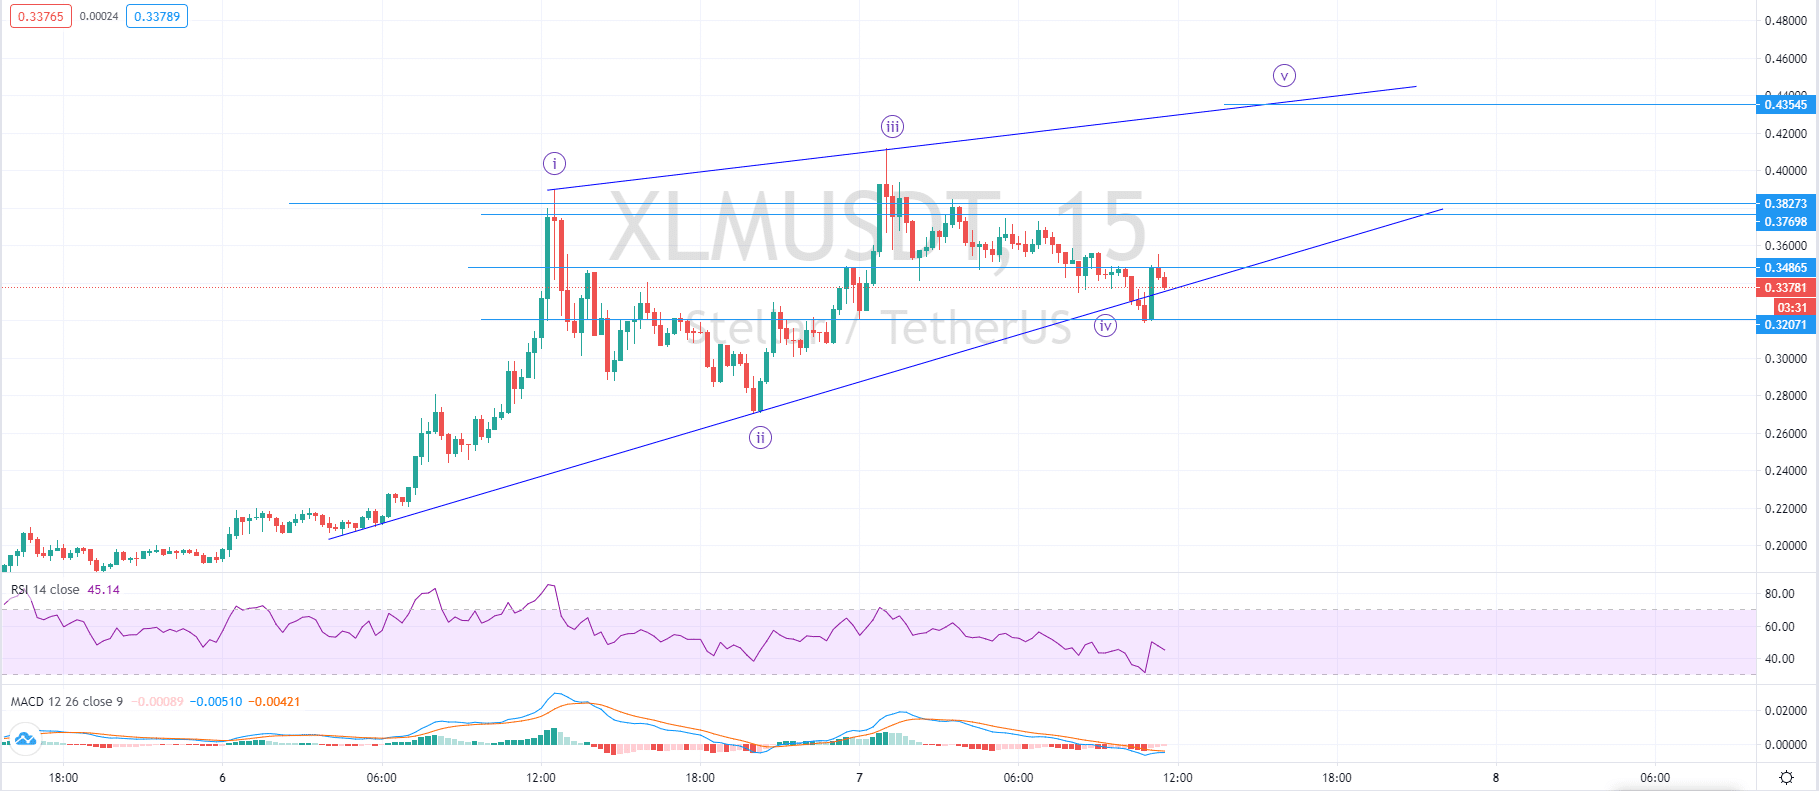 Altcoins to Watch: AAVE, XLM, BCH